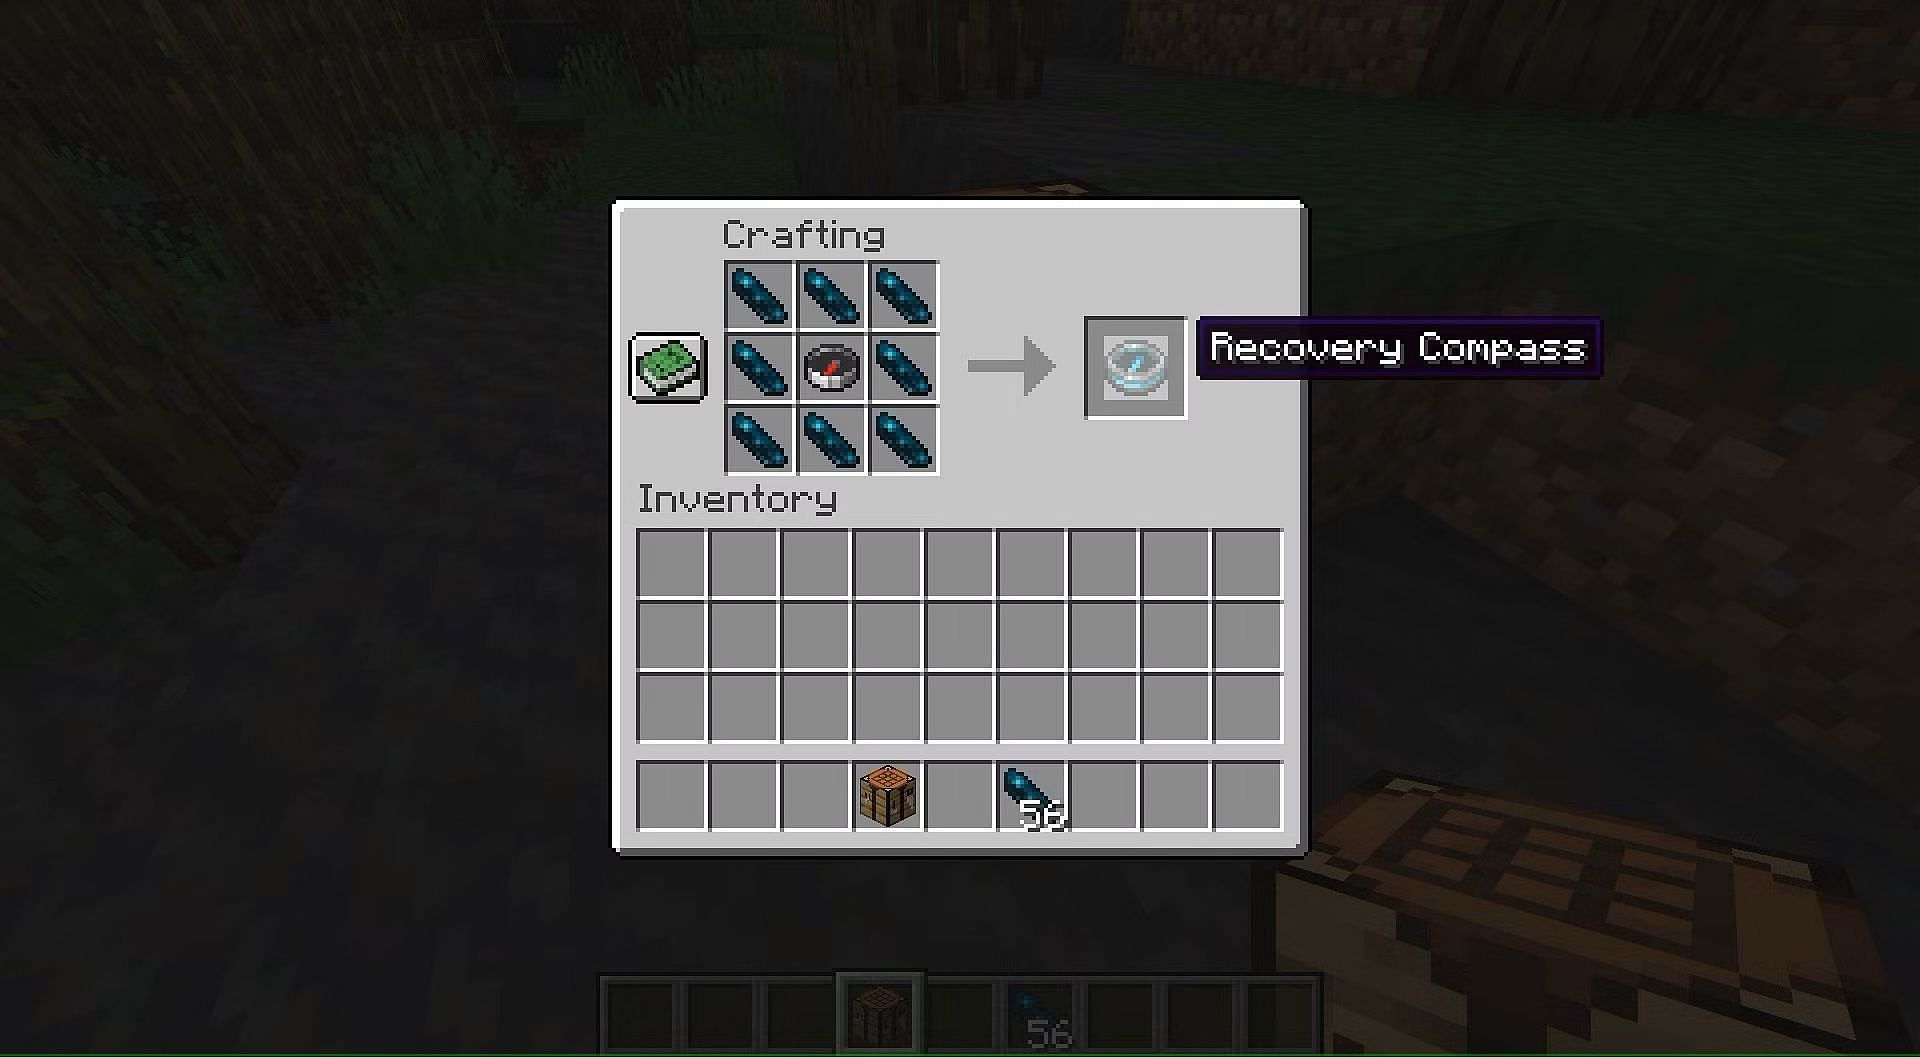 Recovery compass crafting recipe in Minecraft (Image via Mojang)